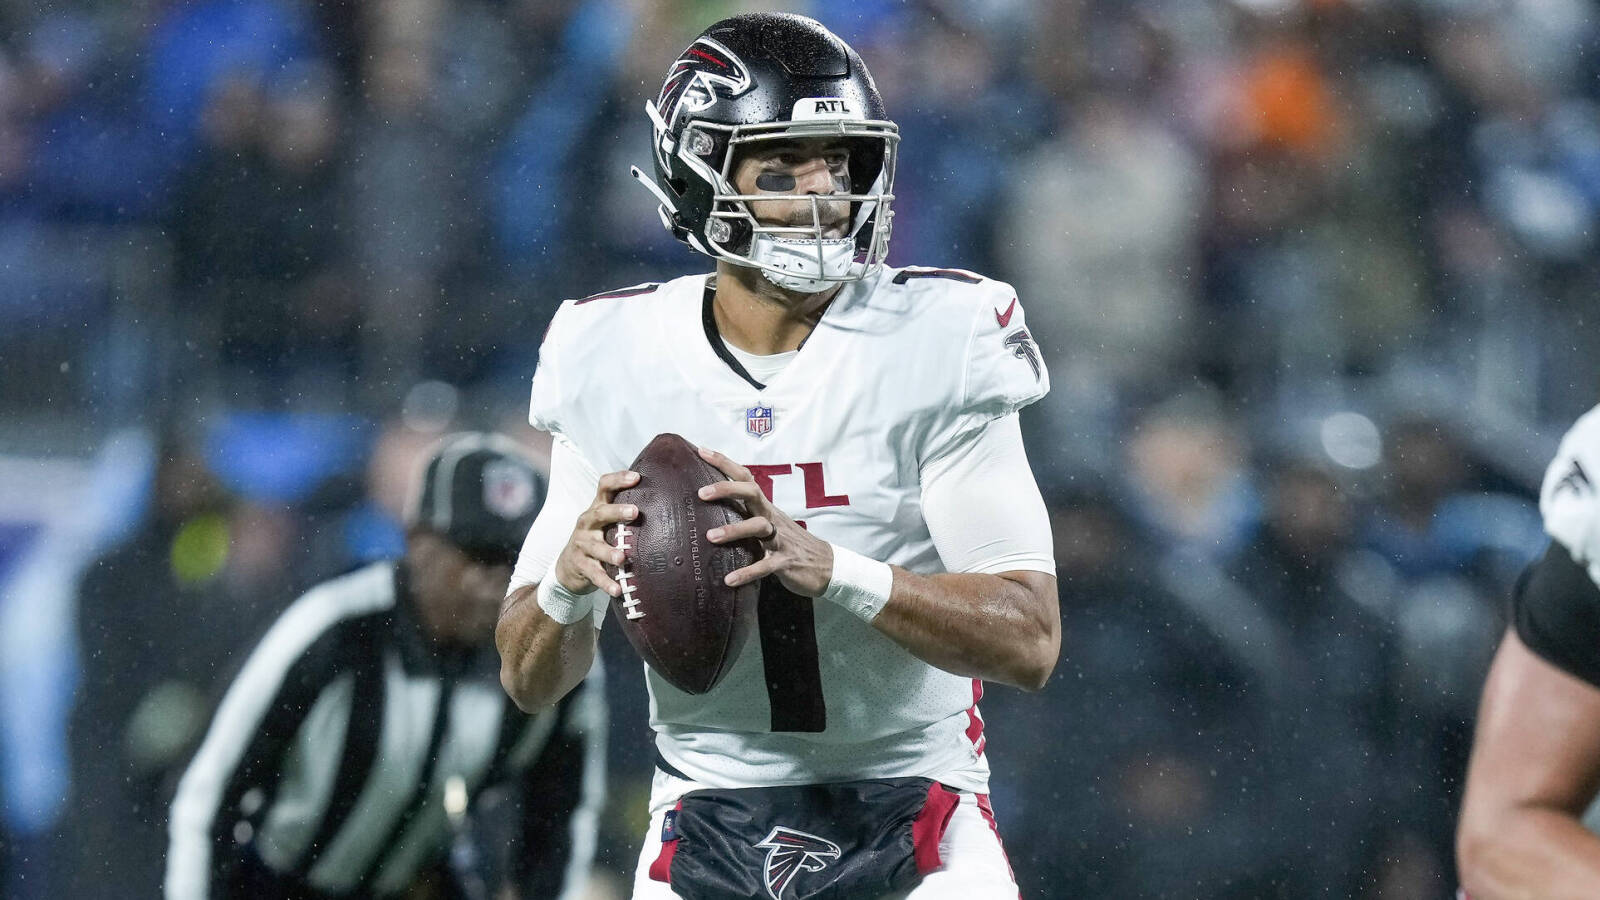 Falcons QB Marcus Mariota’s starting future uncertain after ugly loss to Panthers